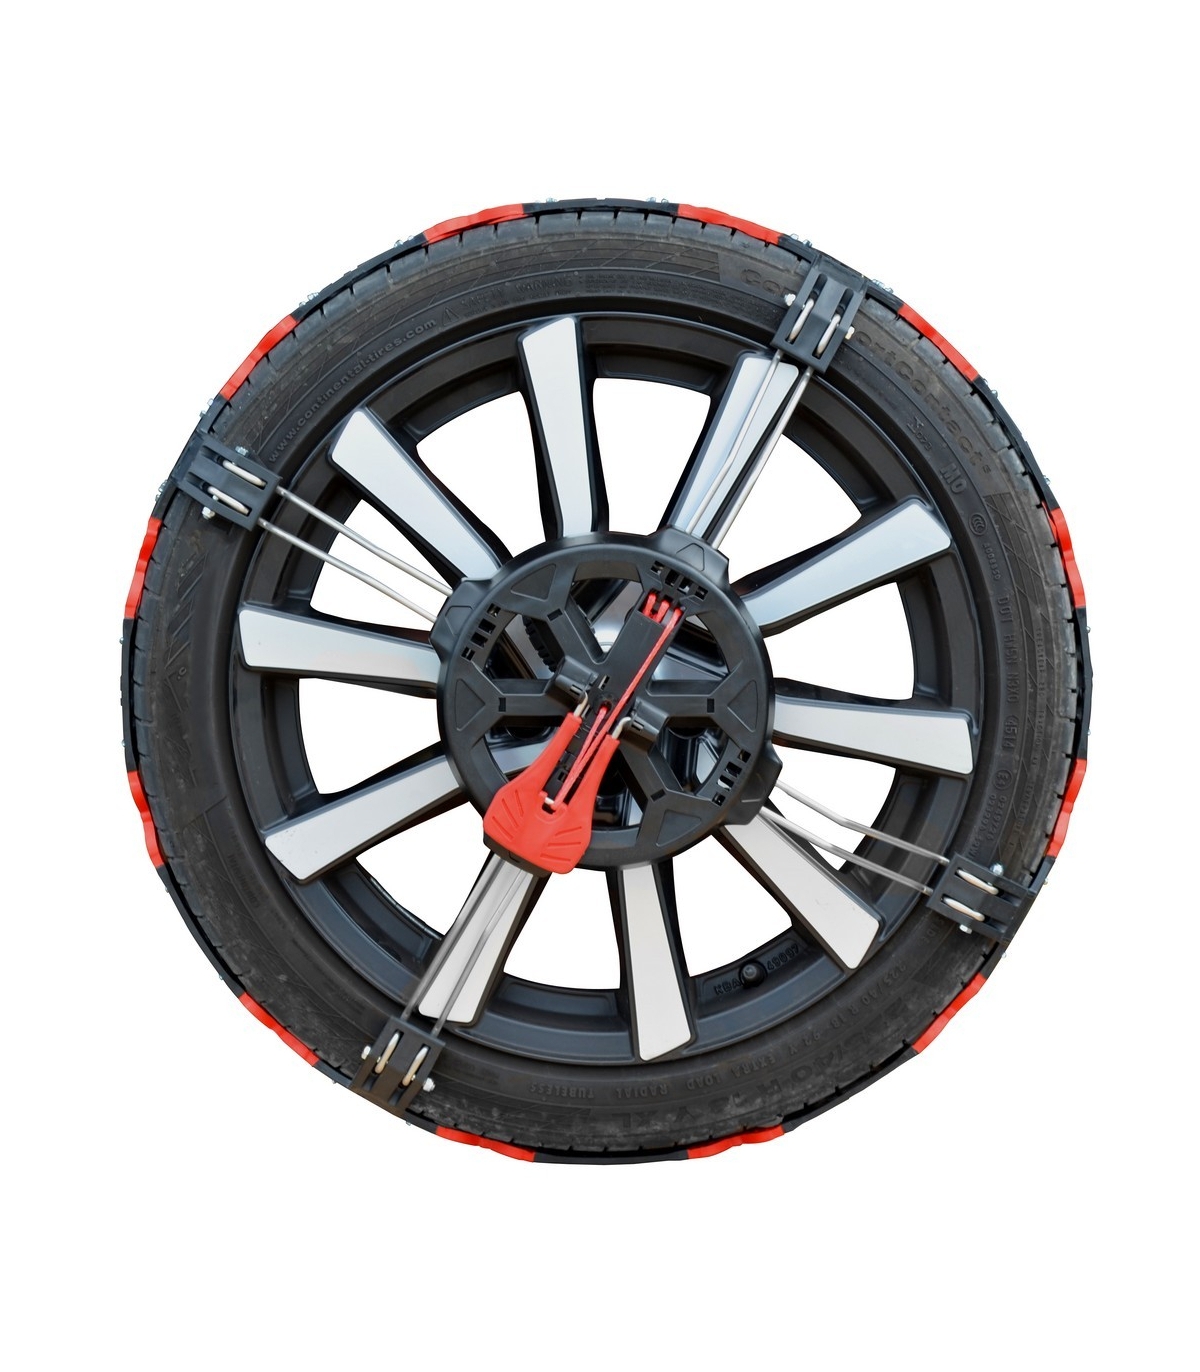 235 - 235/55R17 Utilitaire - Pro Chaines Neige